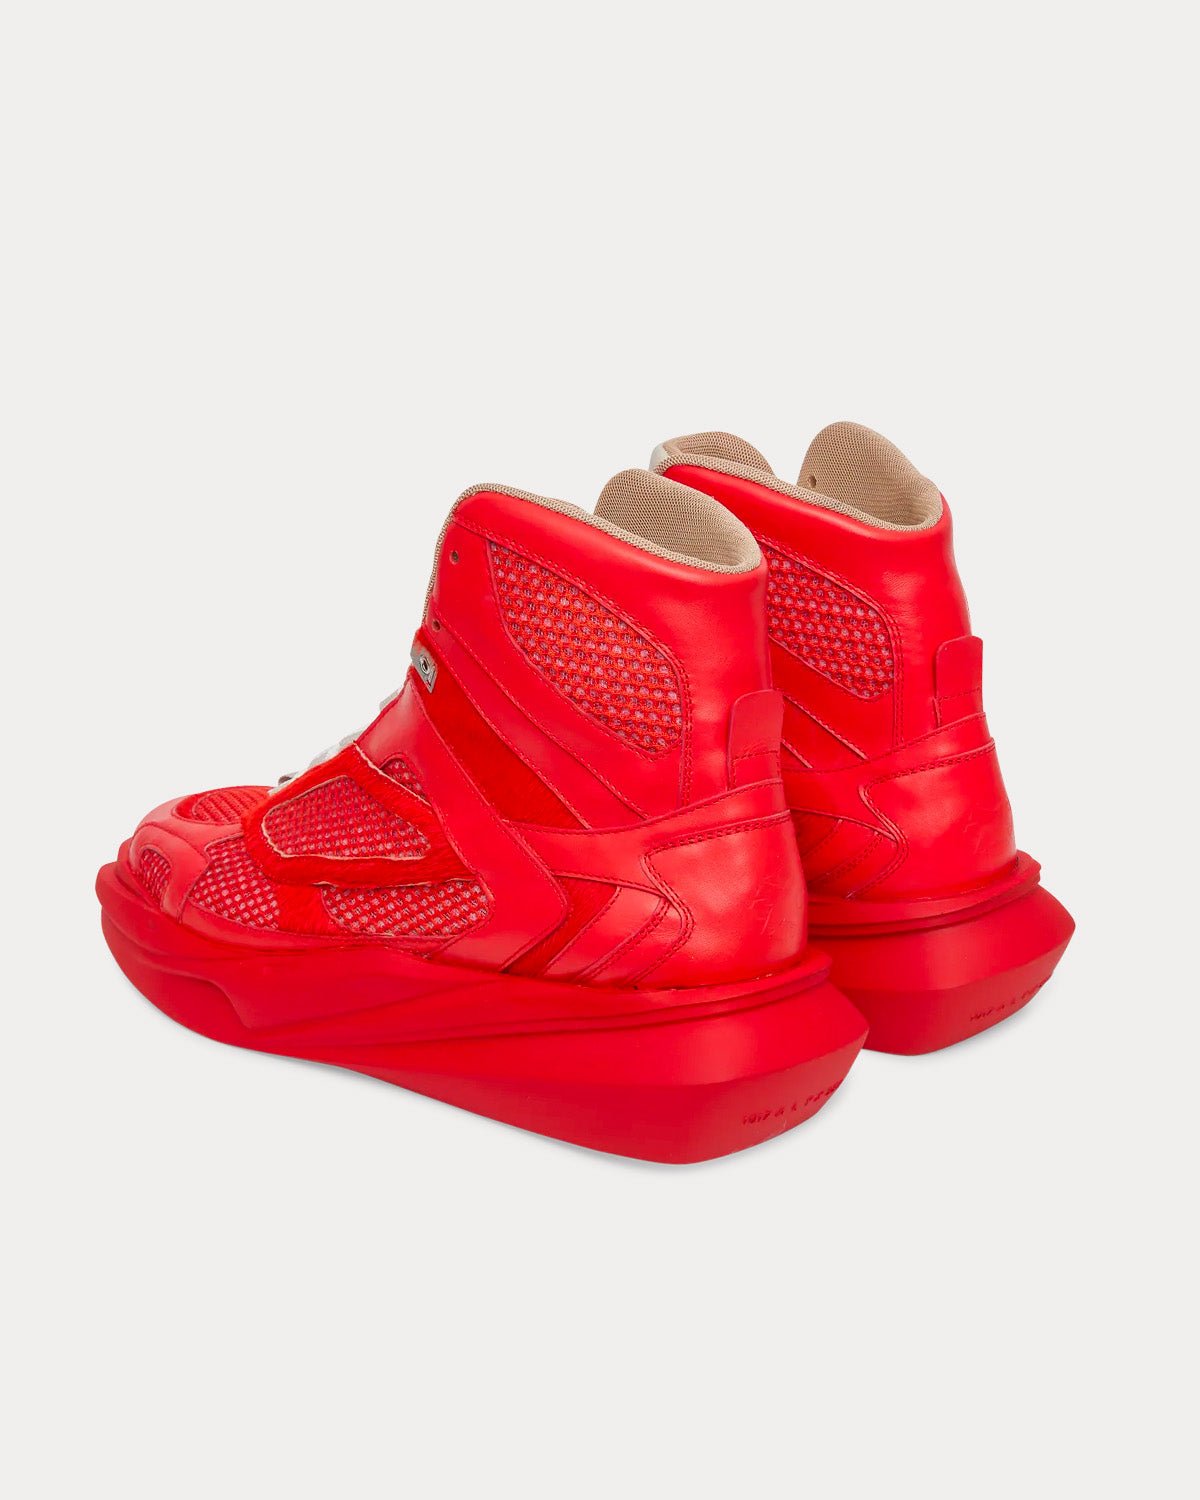 1017 ALYX 9SM - Mono Hiking Red High Top Sneakers